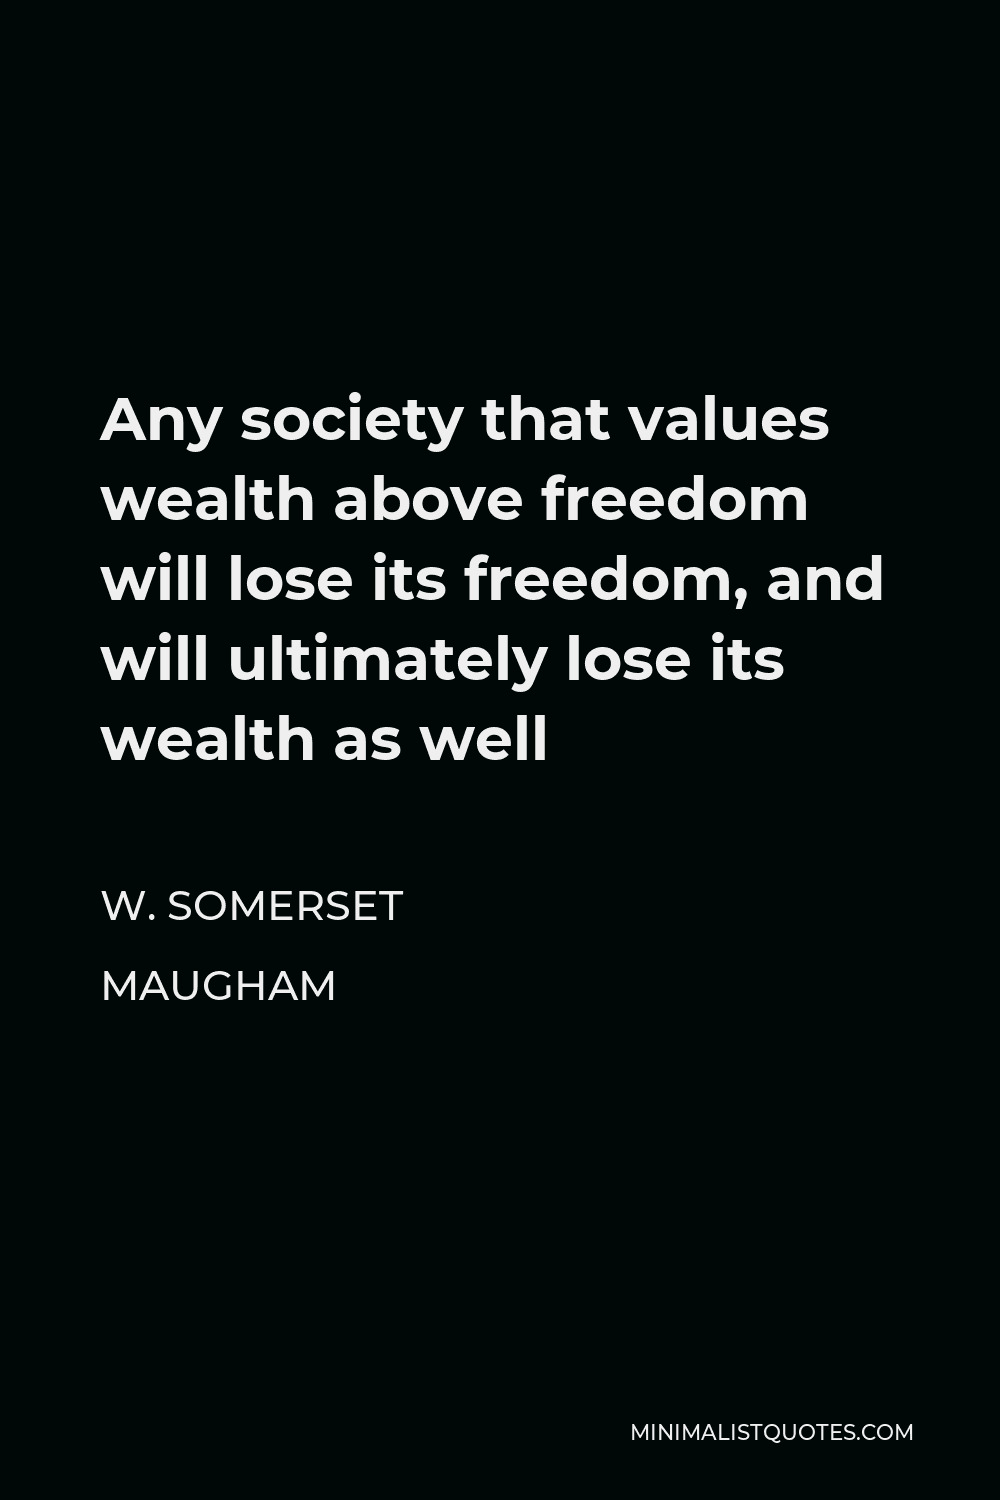 W. Somerset Maugham Quote - Any society that values wealth above freedom will lose its freedom, and will ultimately lose its wealth as well